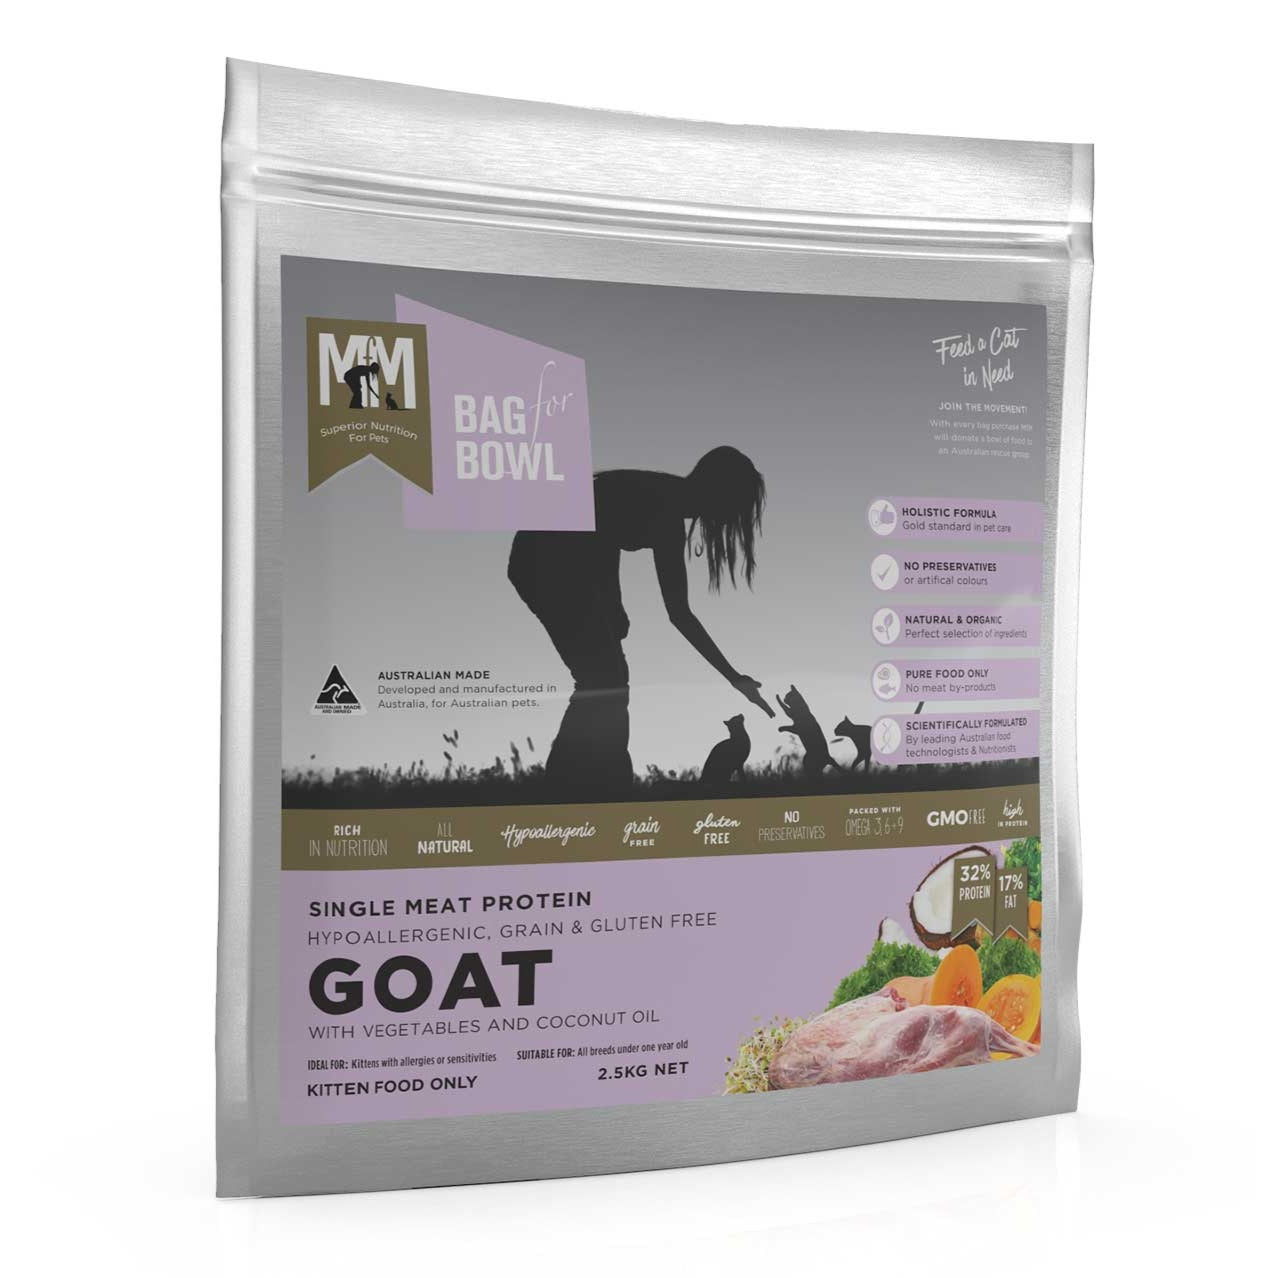 Meals For Meows Cat Food Kitten Single Protein Goat